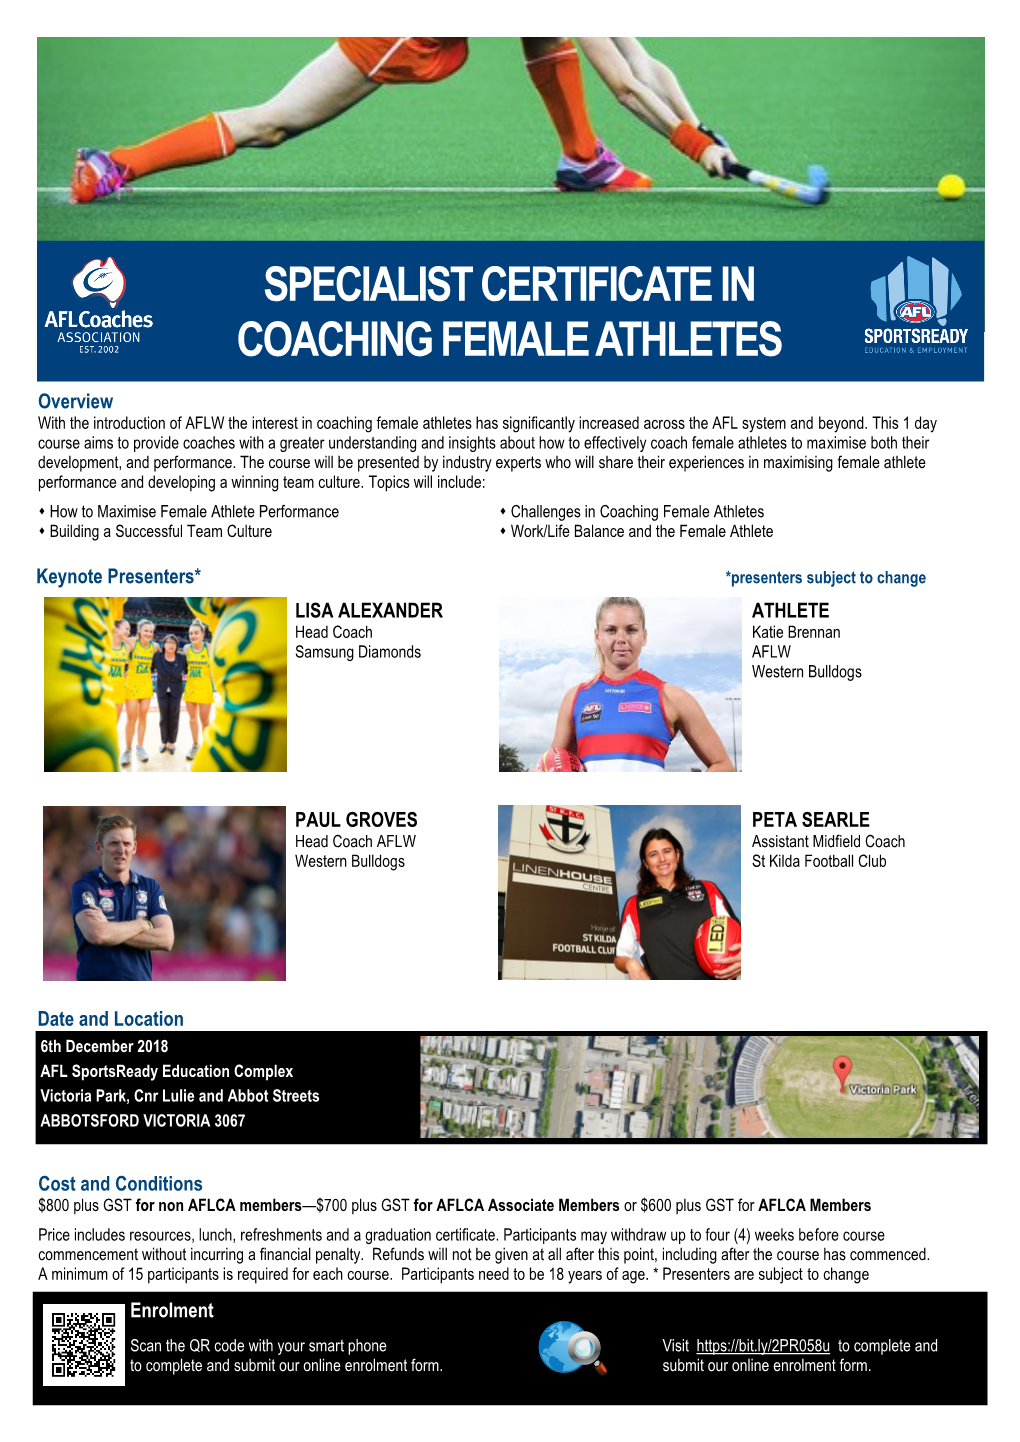 Specialist Certificate in Coaching Female Athletes